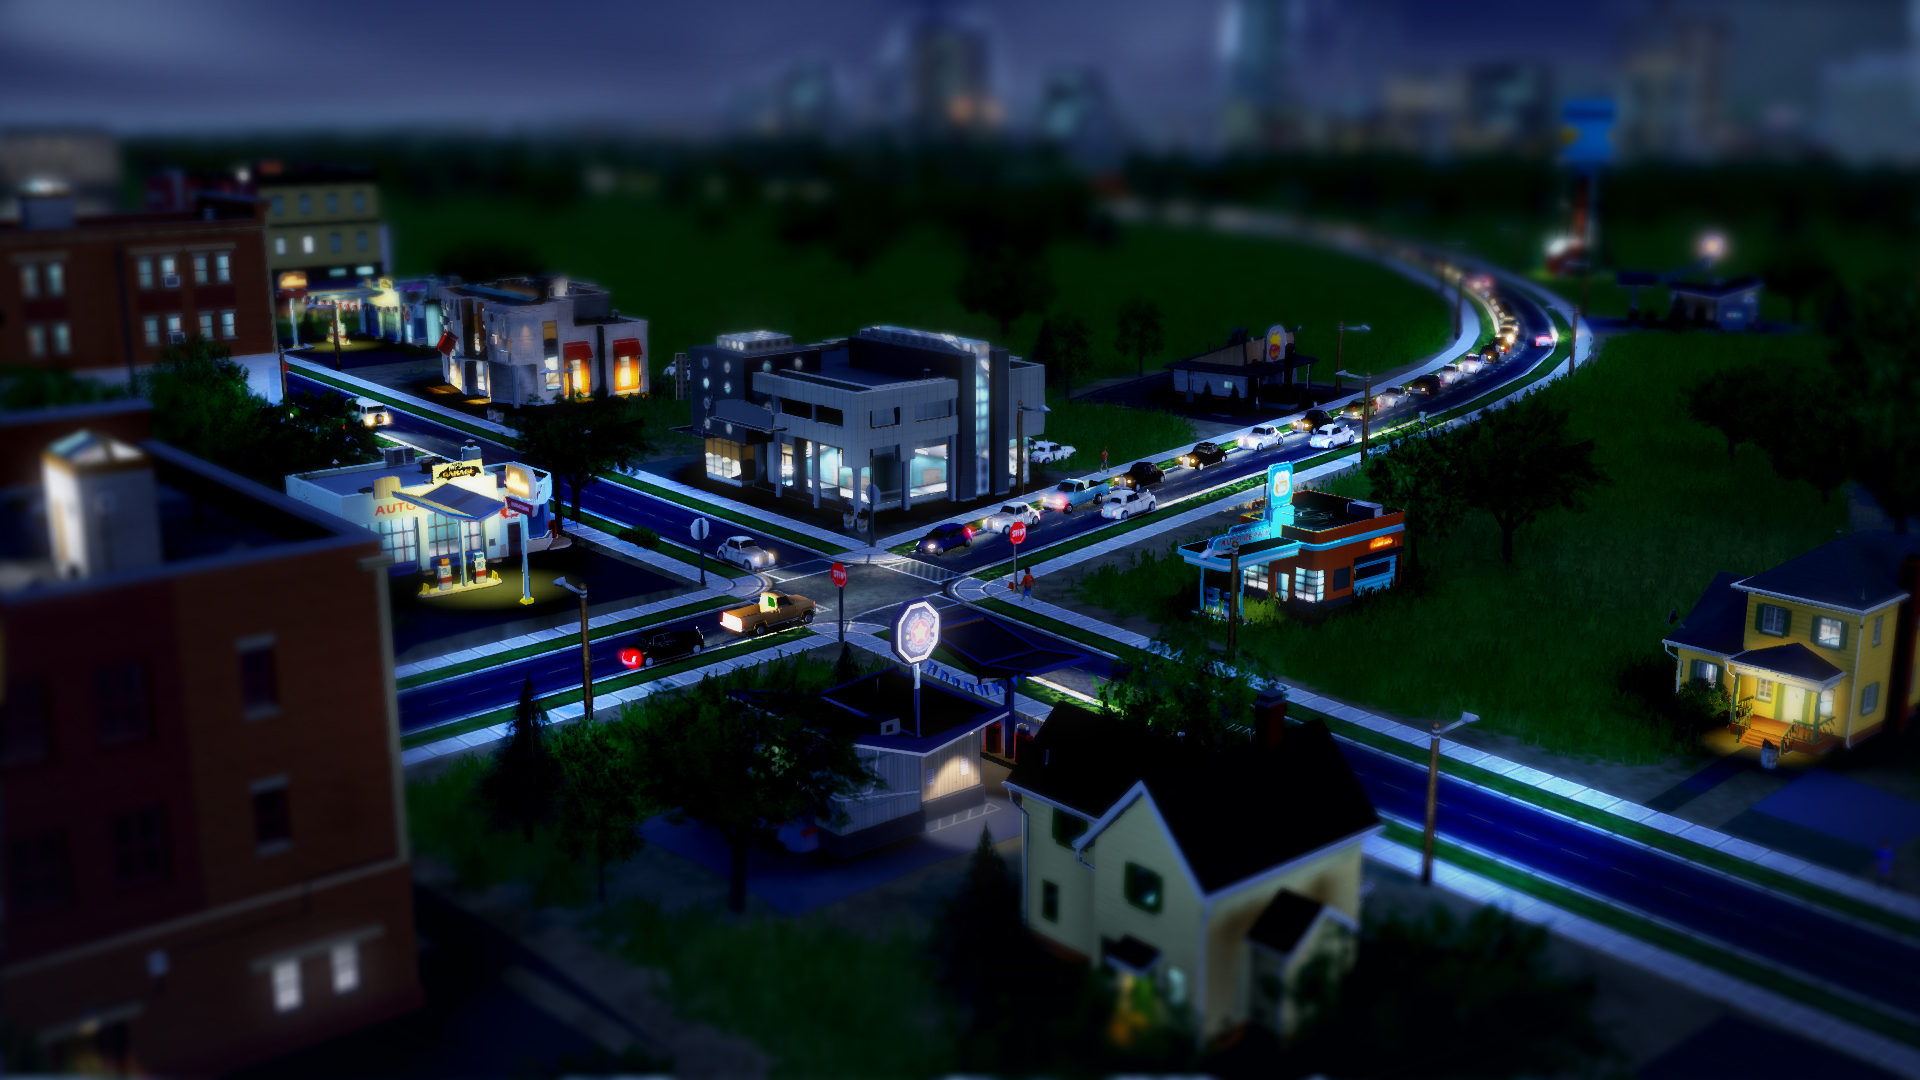 simcity 5 without origin crack